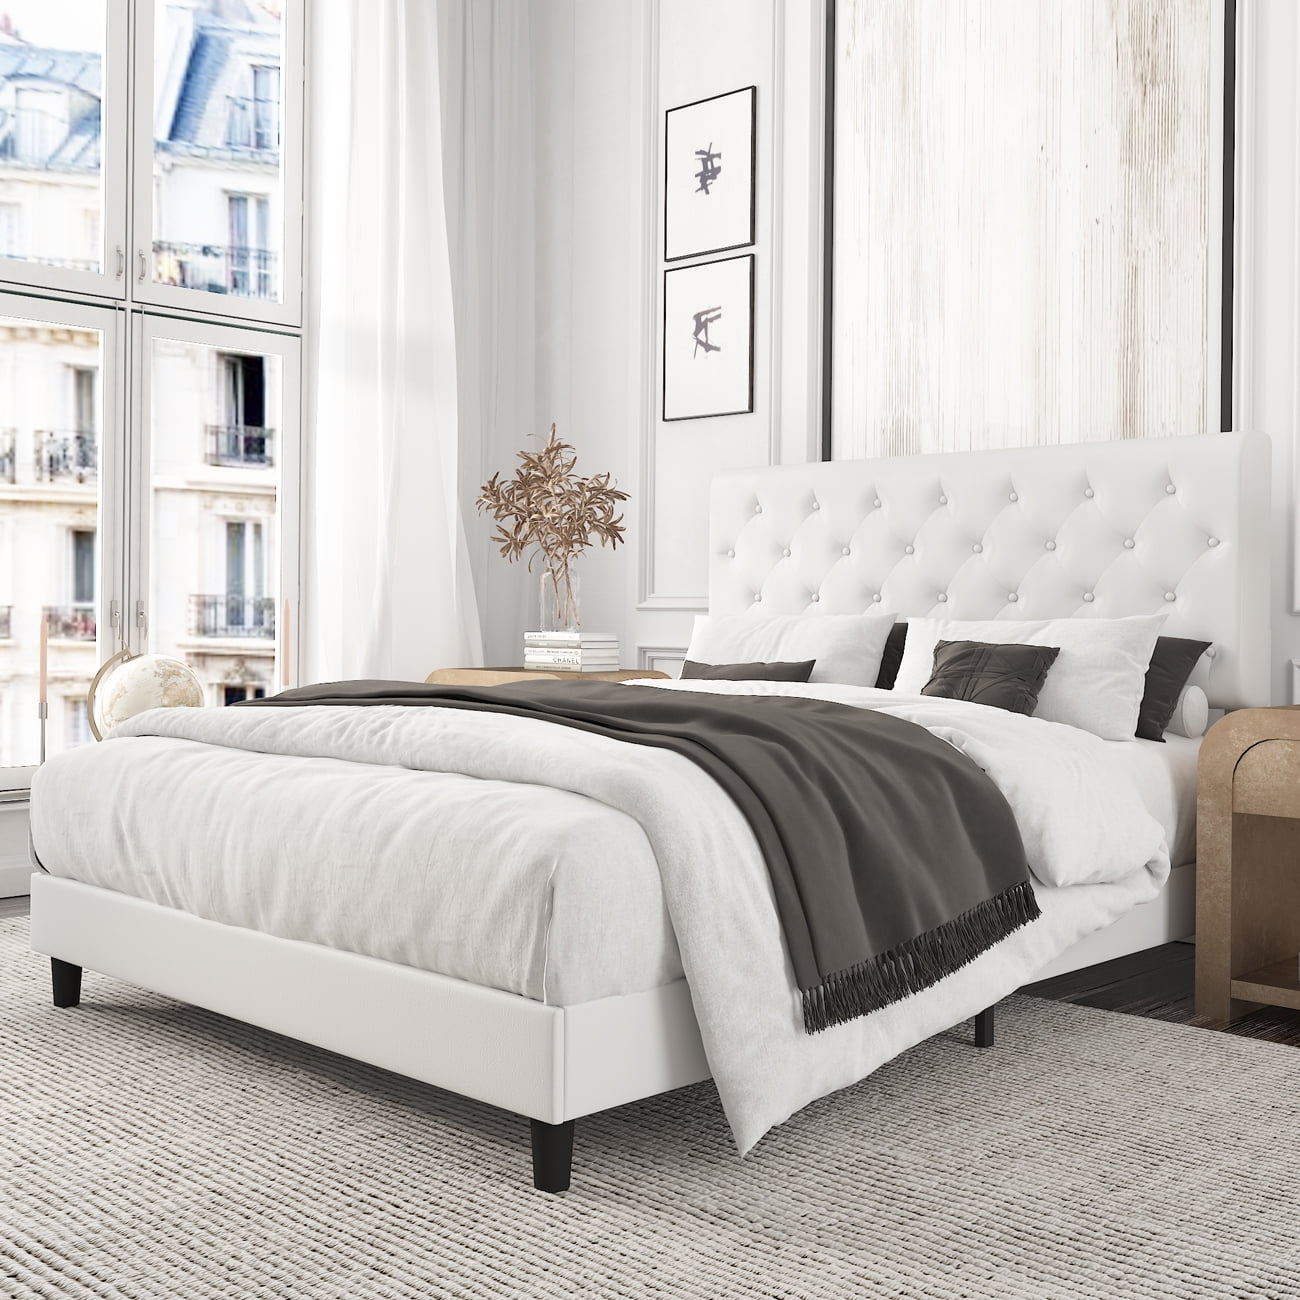 Amolife Queen Bed Frame with Adjustable Headboard, Diamond Button Tufted Style, White